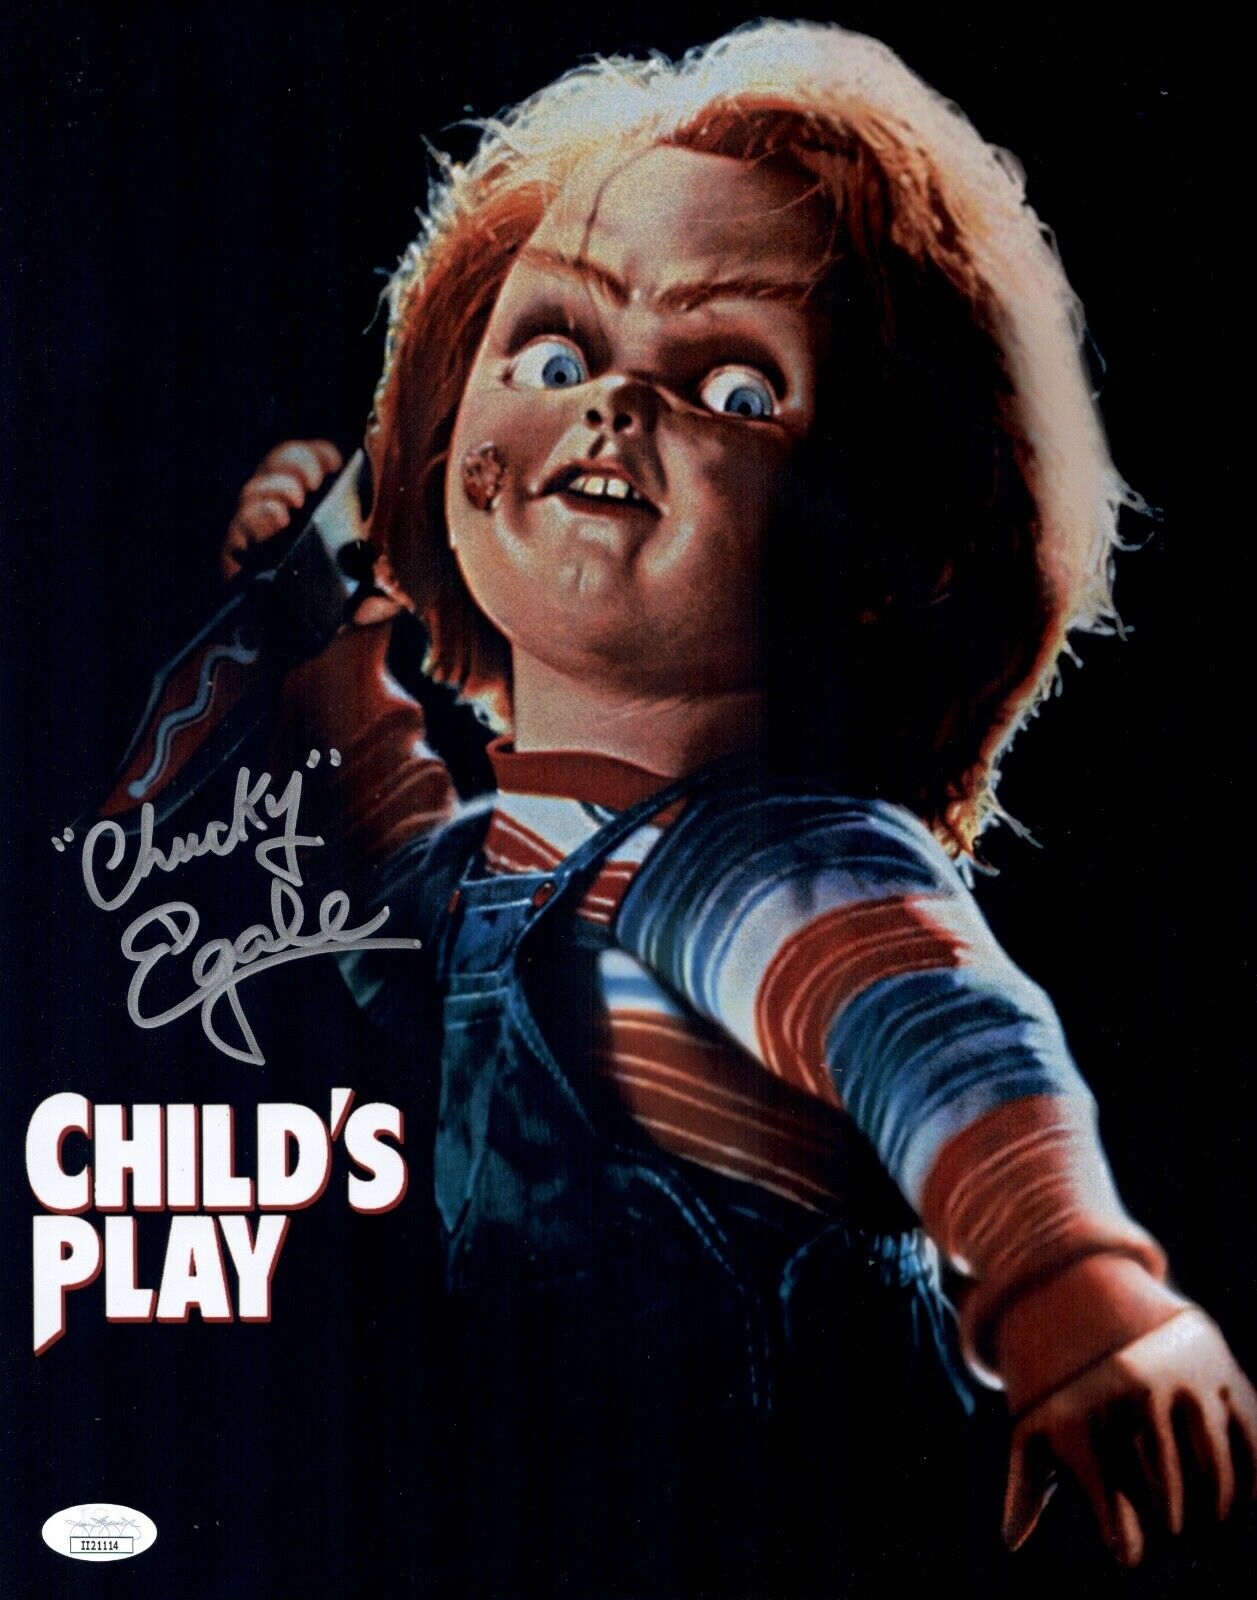 ED GALE Chucky Signed 11x14 Photo Poster painting Child's Play In Person Autograph JSA COA Cert